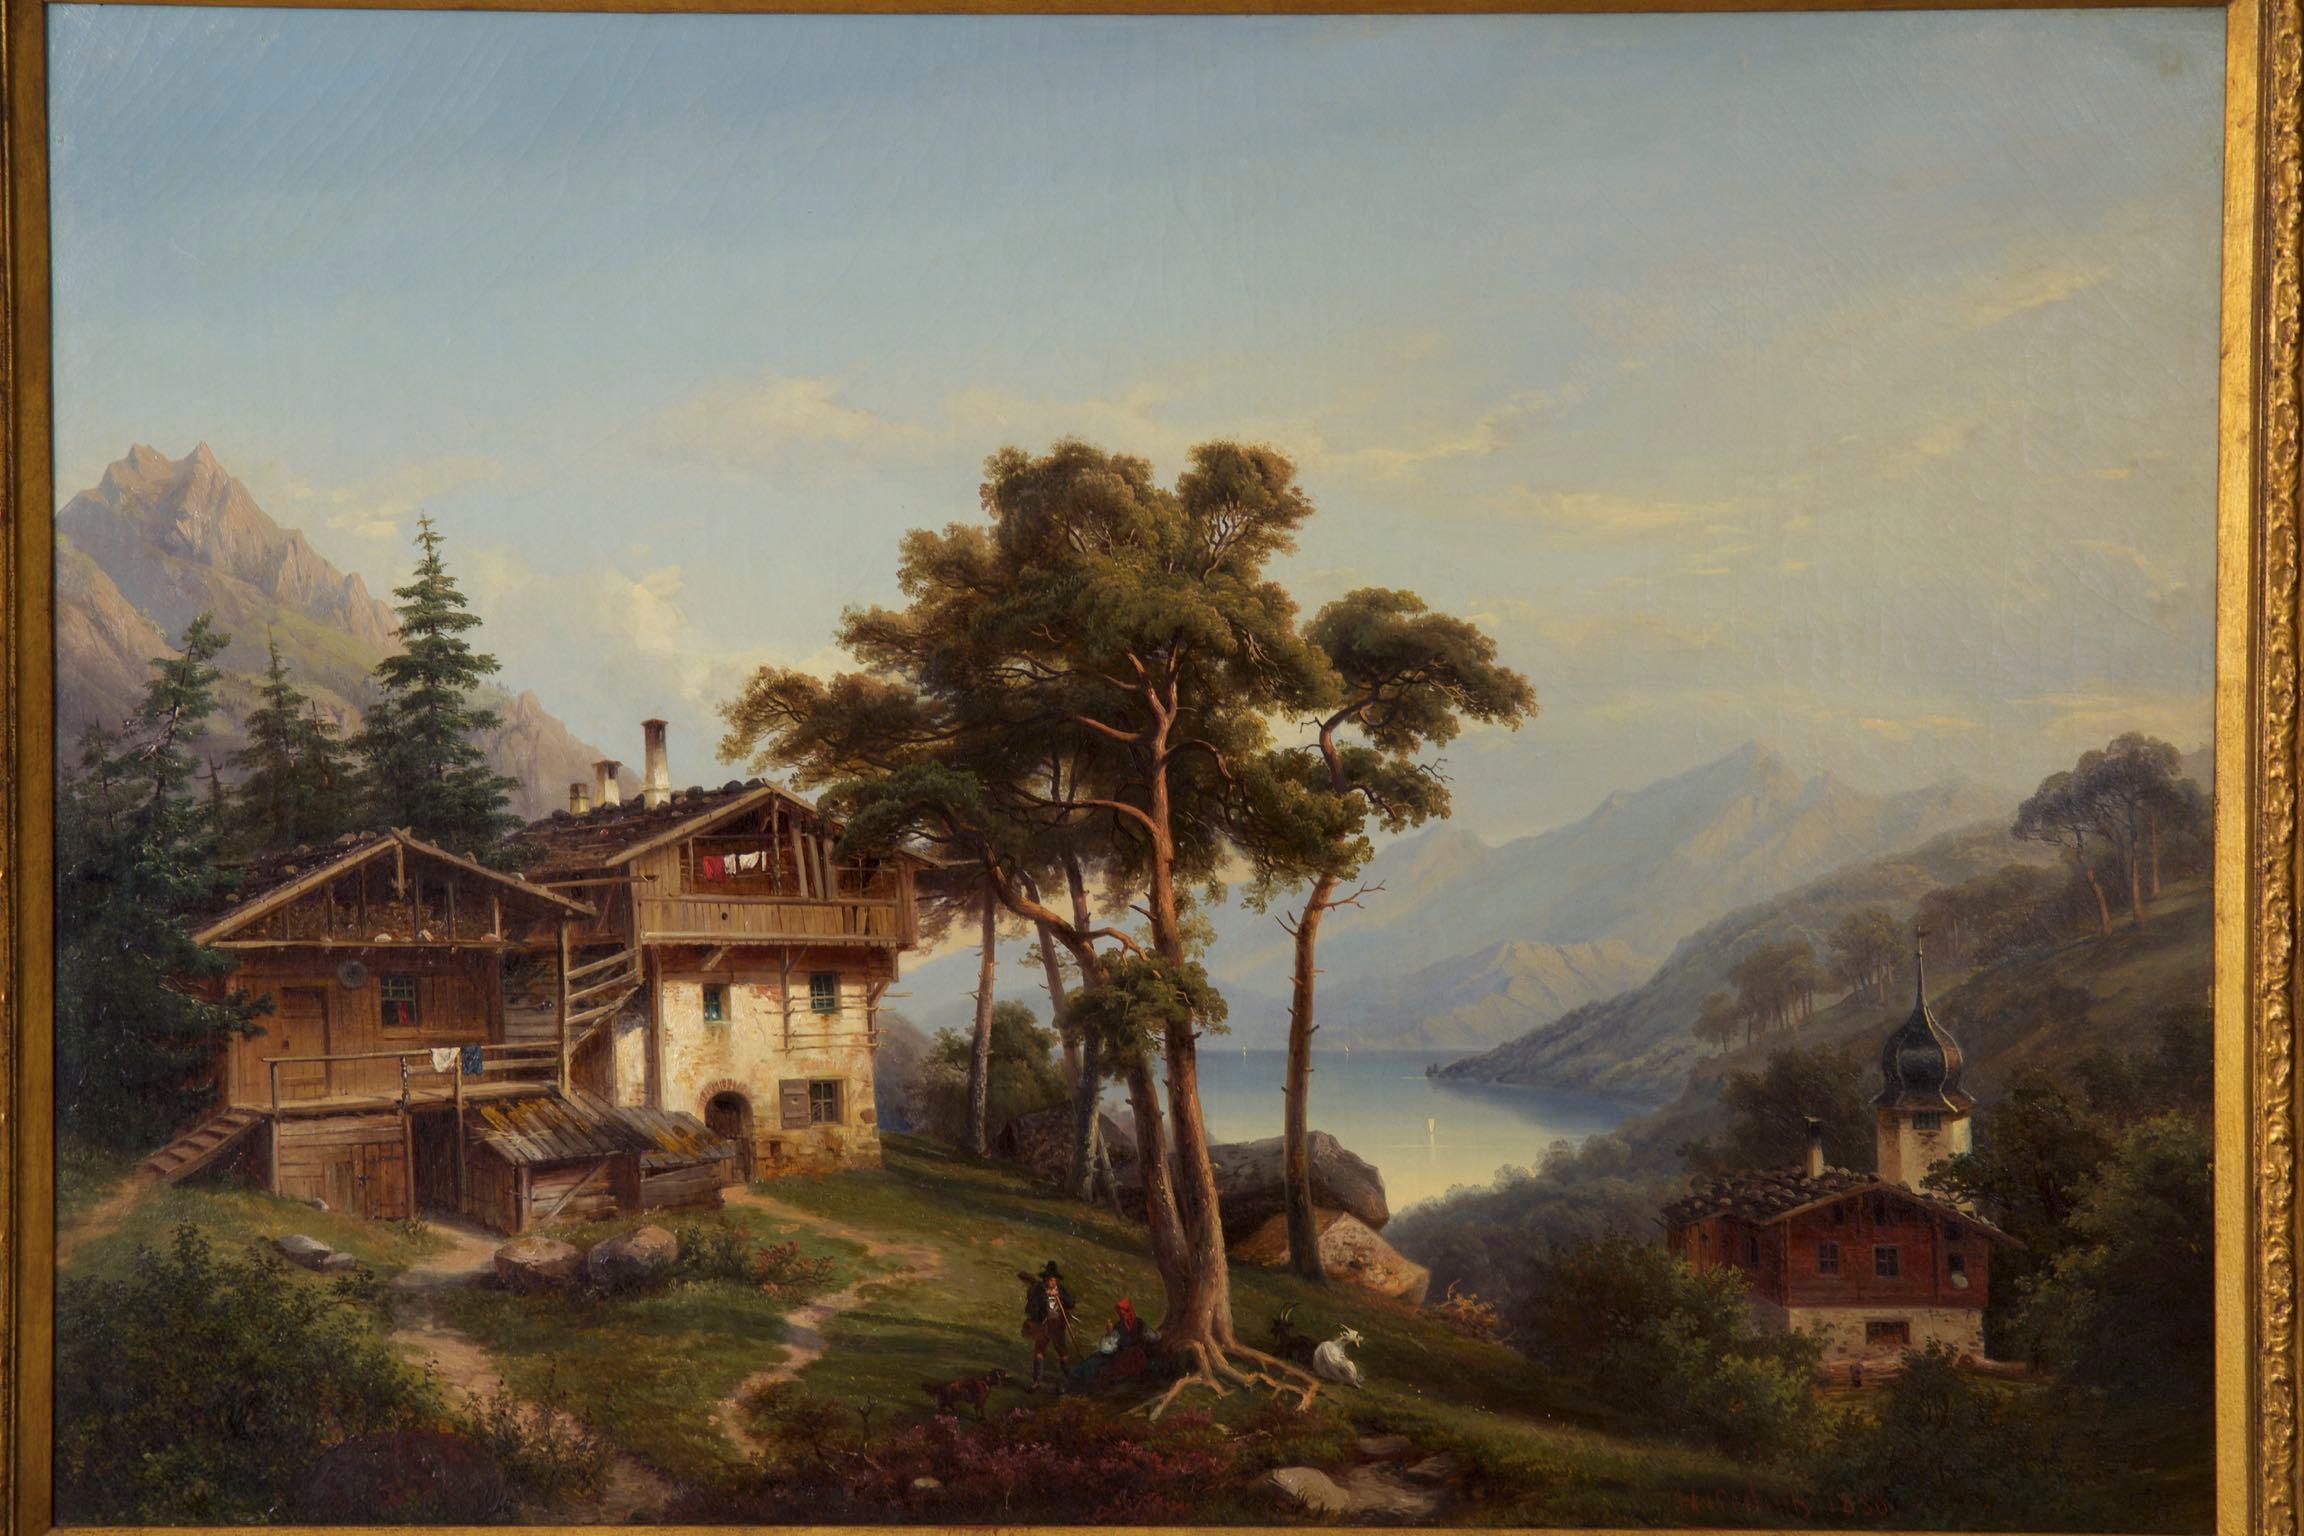 An exceptional genre scene of a German landscape under a nearly cloudless sky, a large wood and stone chalet is tucked into a grove of pine trees overlooking the blue lake below. Mountains loom in the distance while a hiker and his dog chat with a